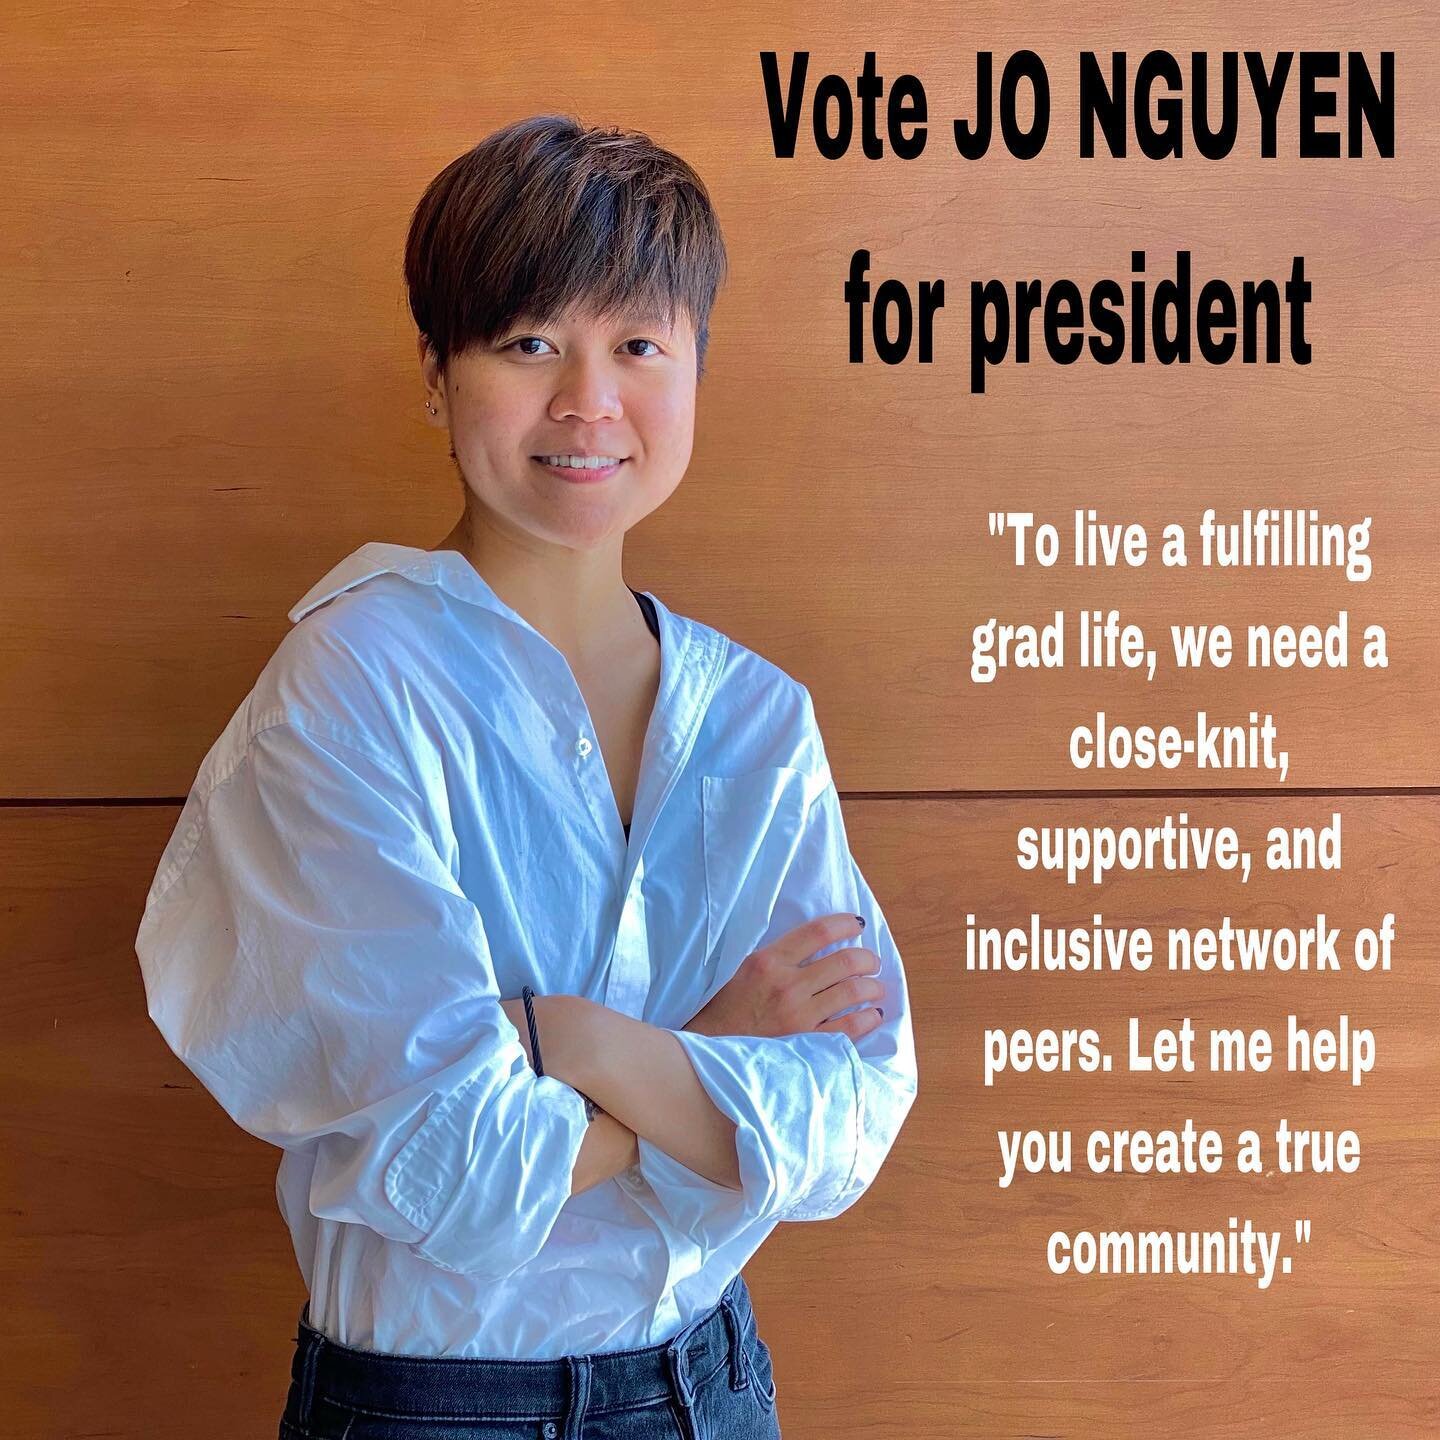 Our PhD candidate Jo Nguyen is running for president of the Donnelly Centre Student Association!! 
Jo has awesome ideas to foster a supportive, inclusive, and meaningful graduate student community. Check out their agenda and vote at https://docs.goog